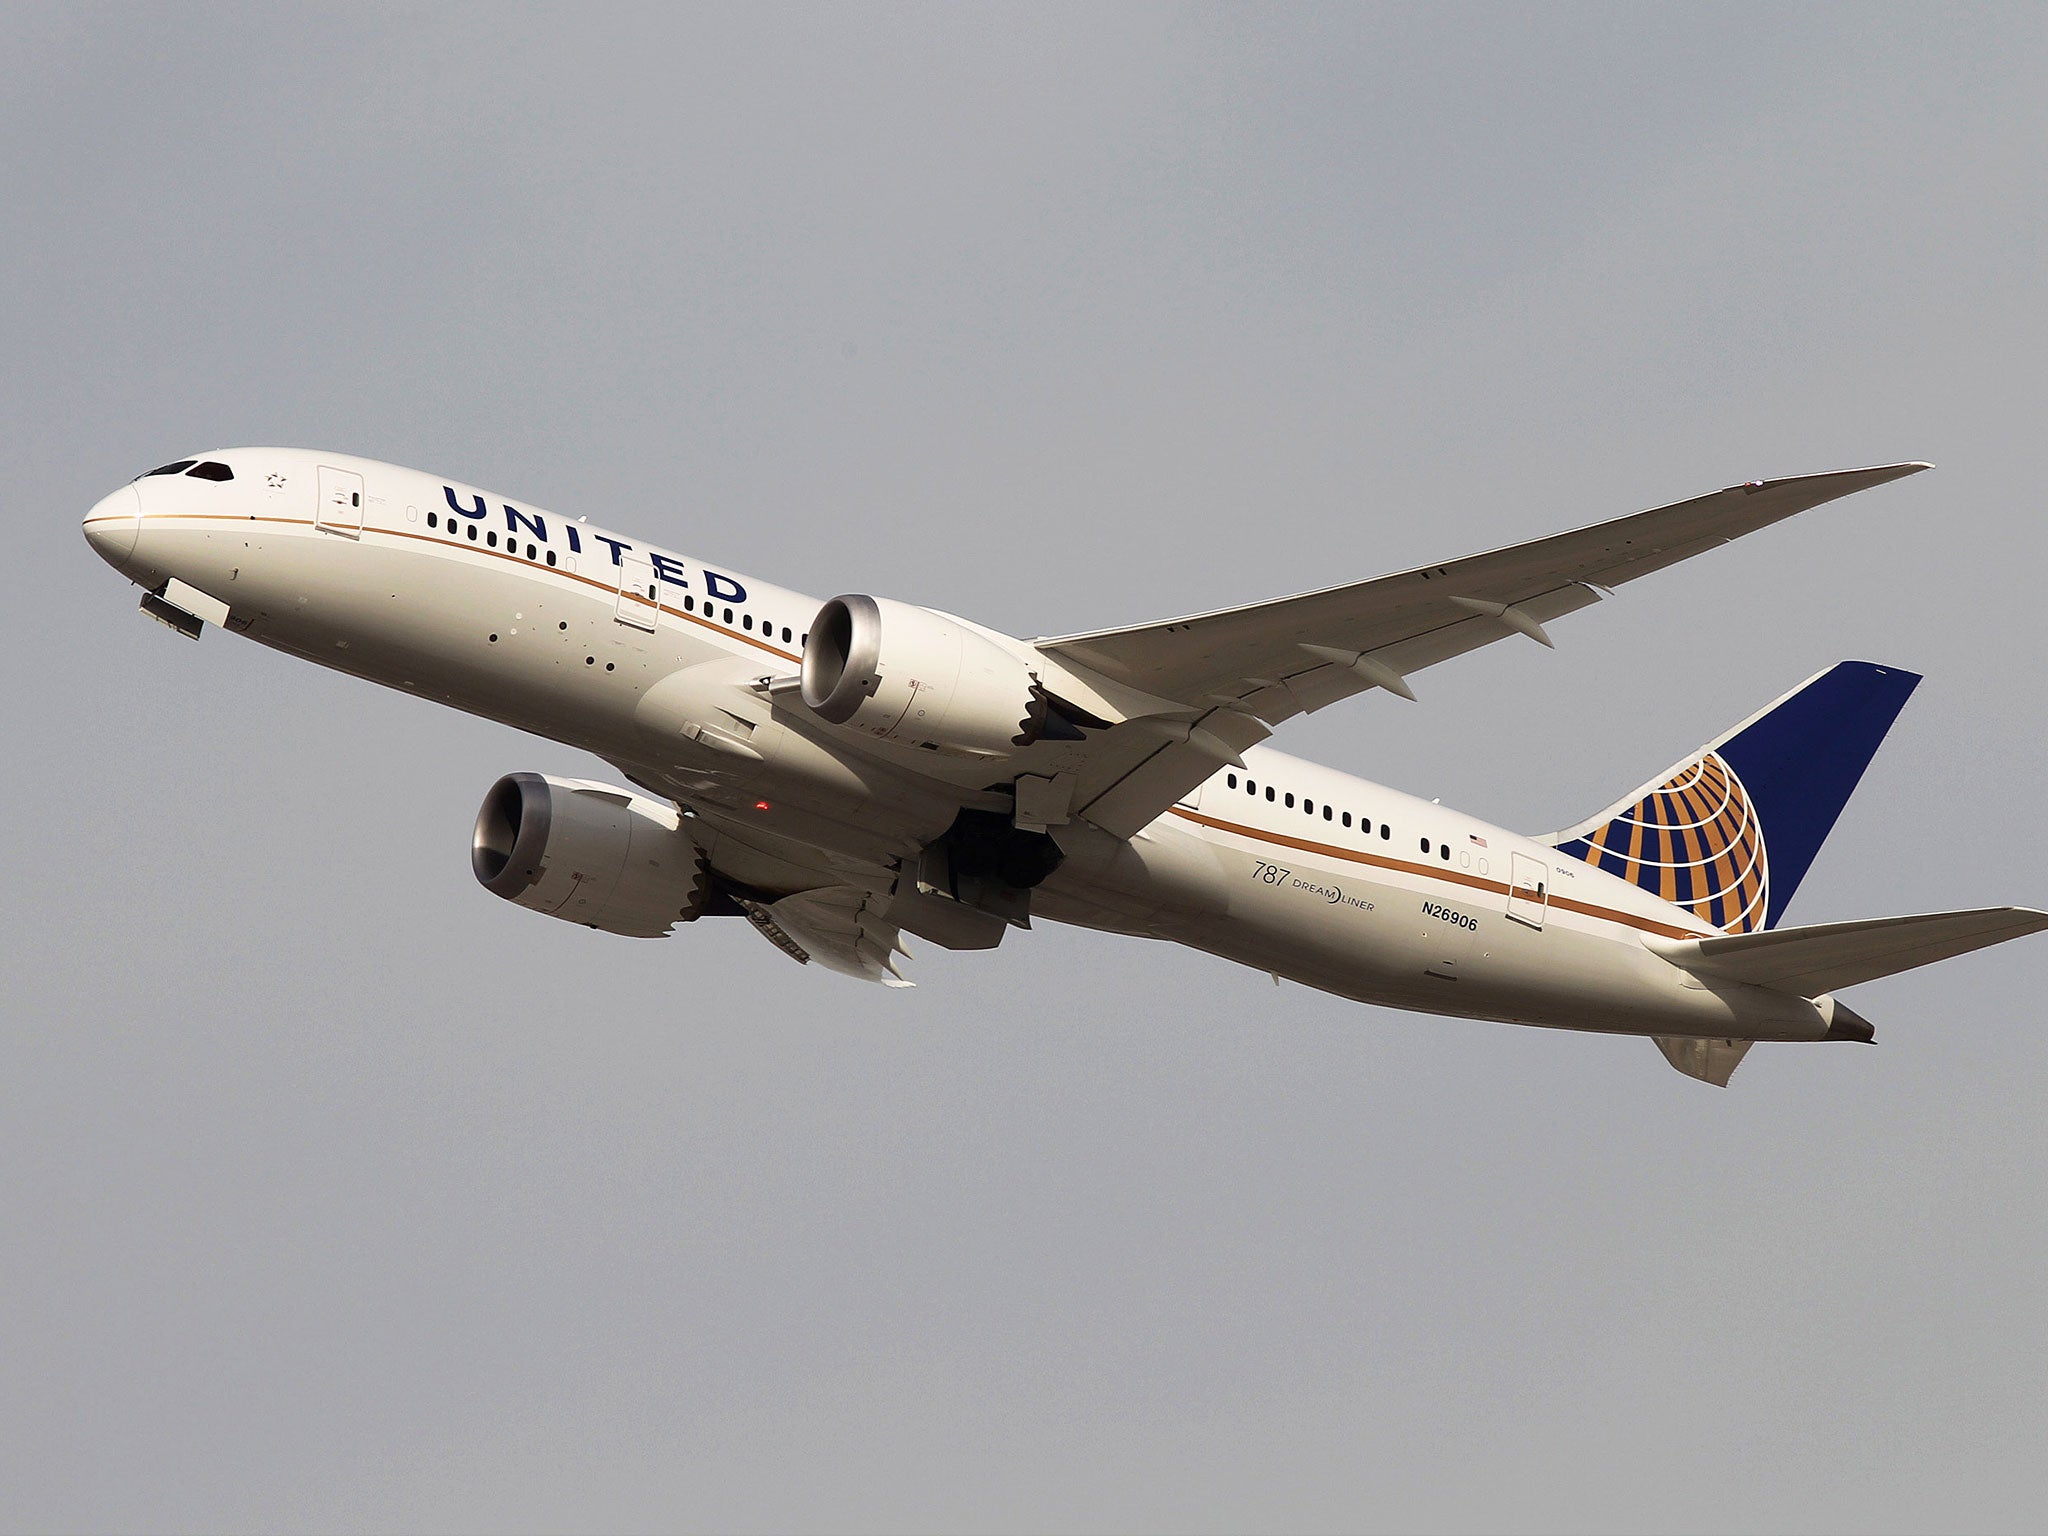 A Boeing 787 Dreamliner operated by United Airlines takes off at Los Angeles International Airport